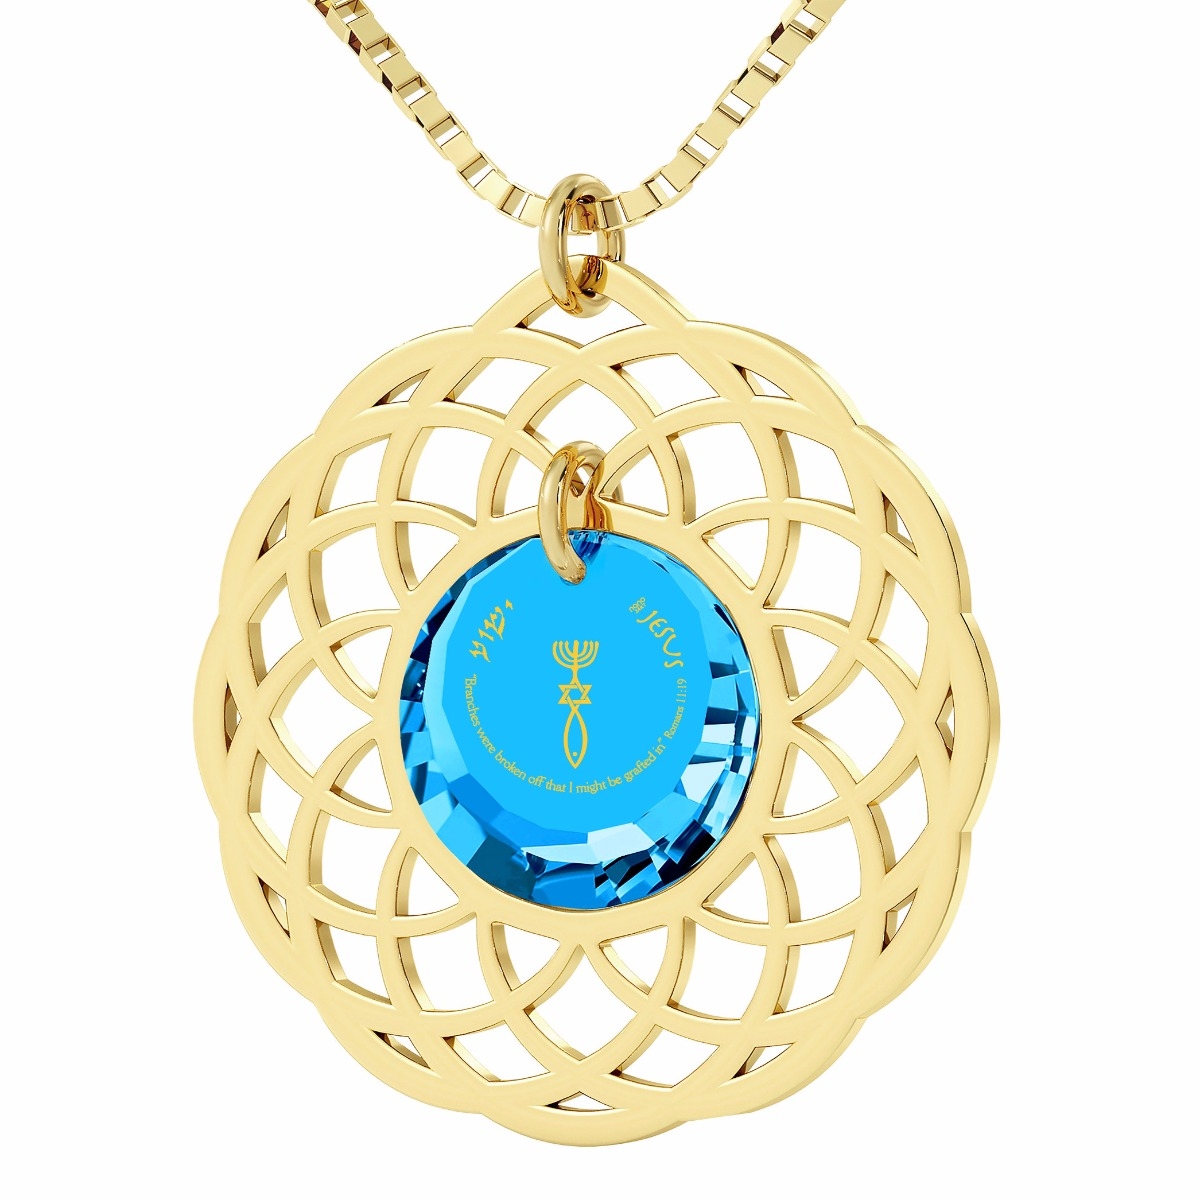 Nano Jewelry 24k Gold Plated & Crystal Grafted-In Mandala Necklace with 24k Gold Micro-Inscription (Blue) - 1